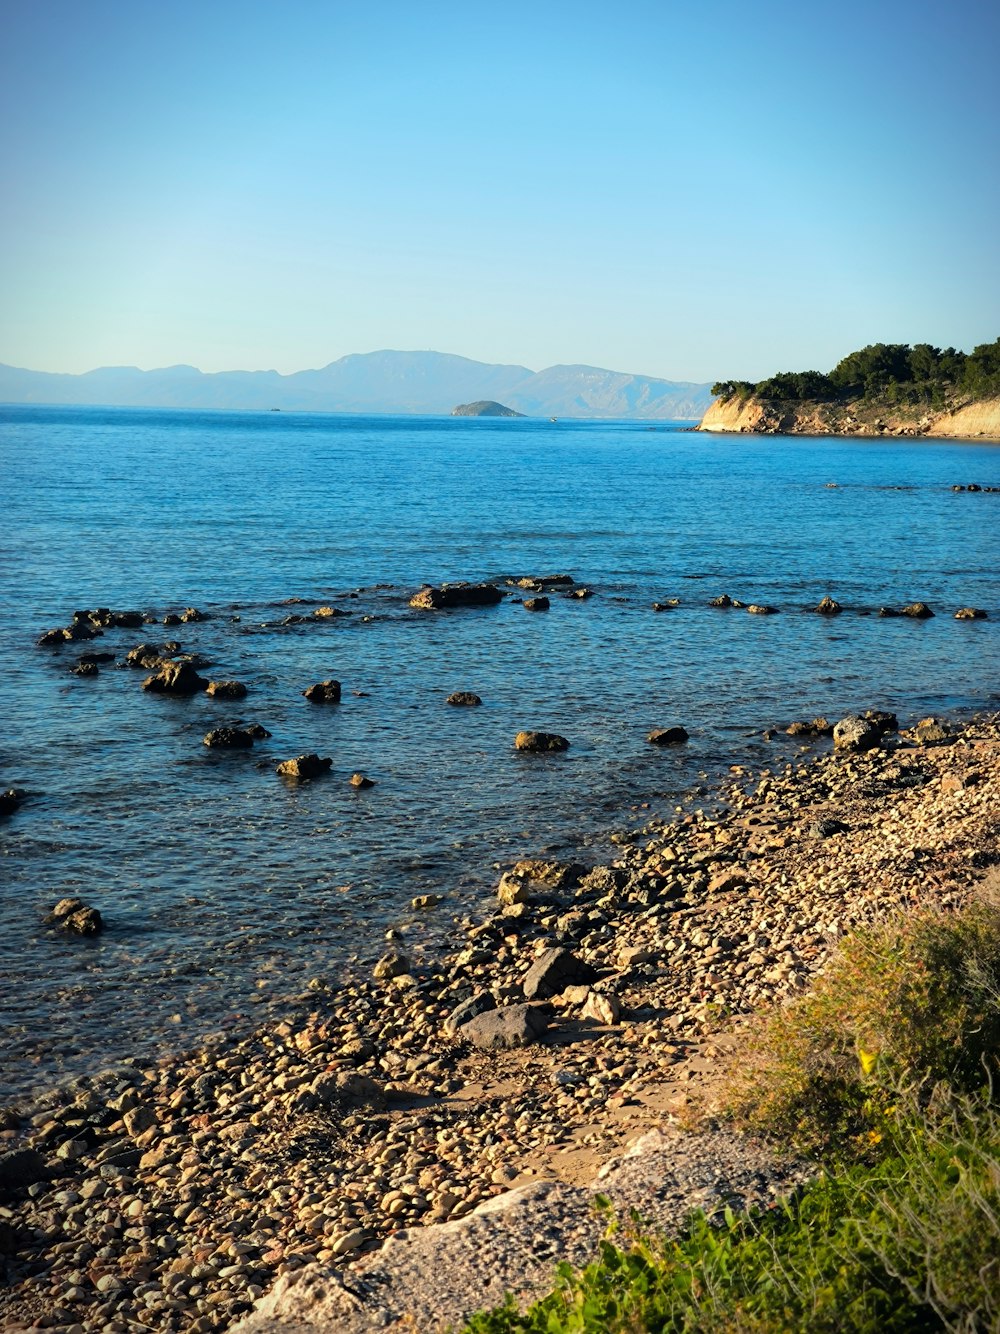 a rocky shore line with a body of water and mountains in the distance